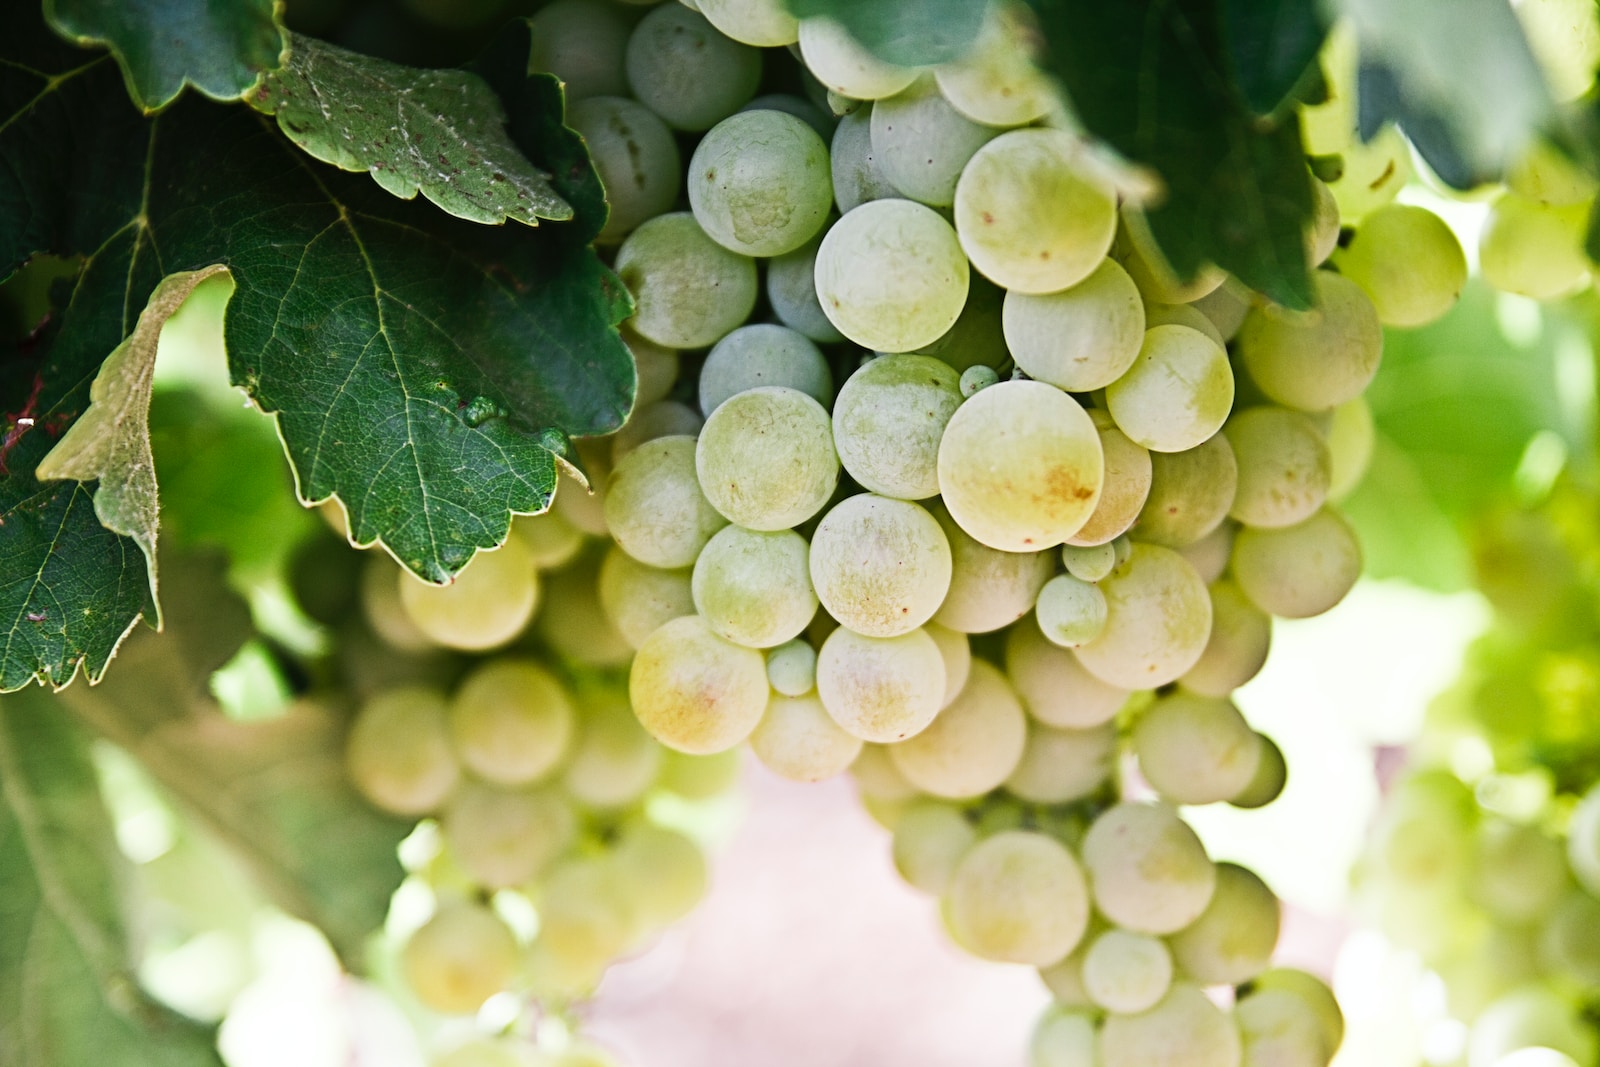 Silvaner wines – All about the grape variety